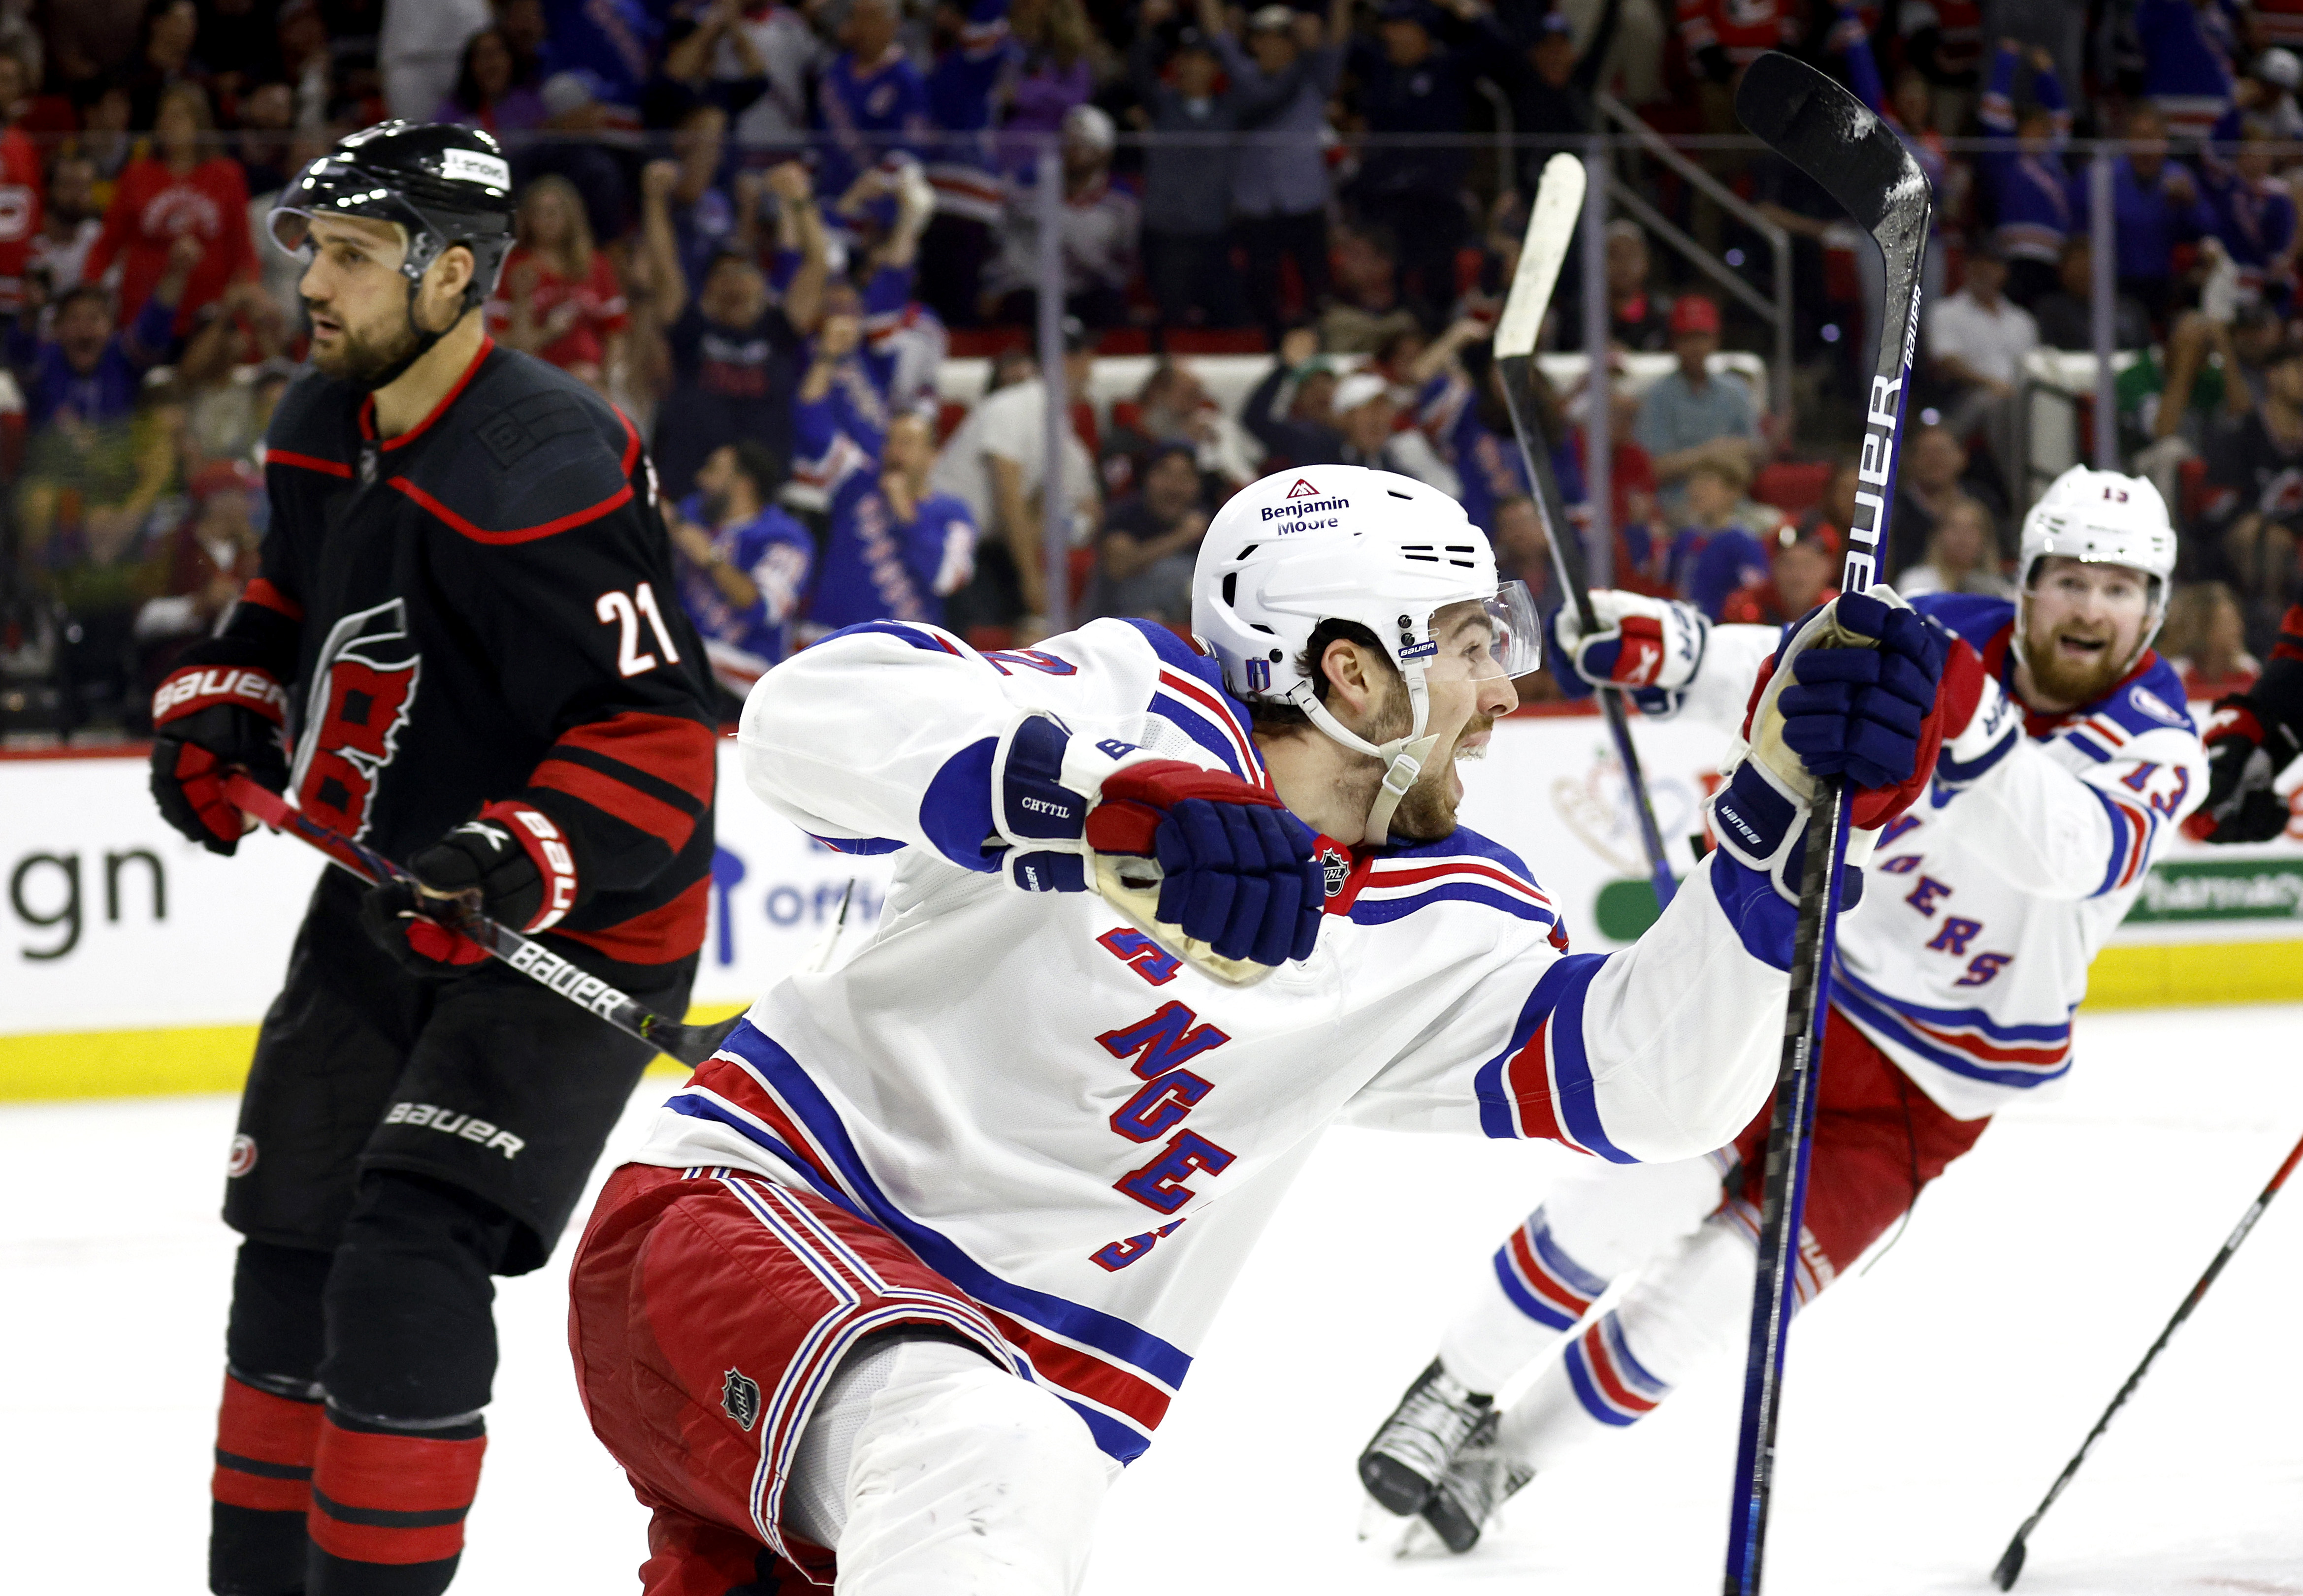 K'Andre Miller goes end-to-end and nets fantastic goal for Rangers 